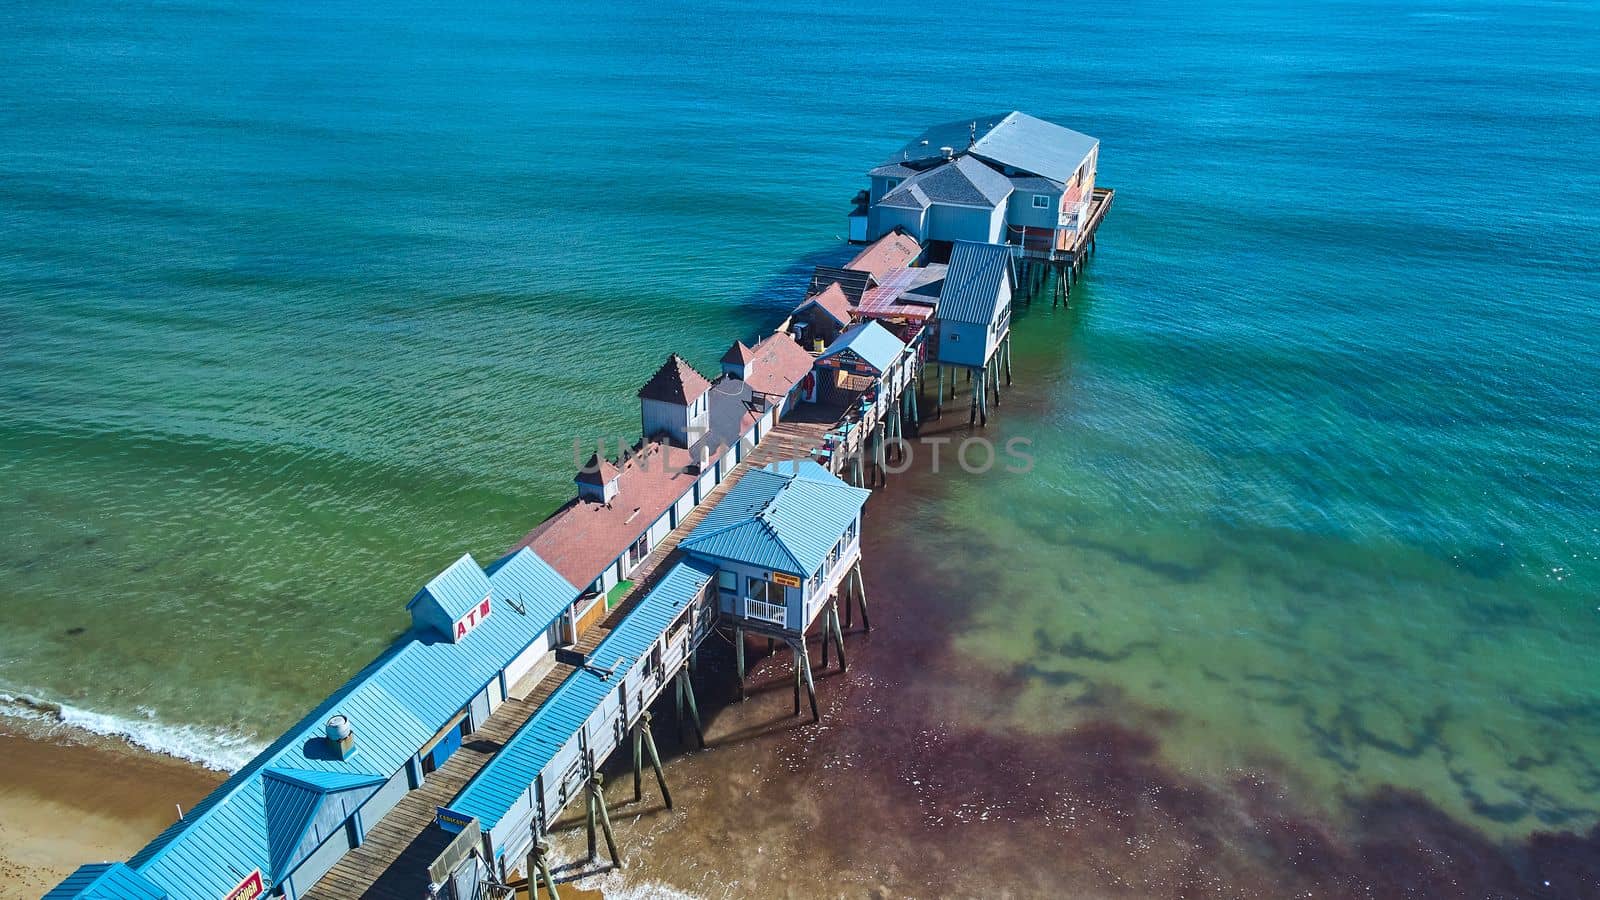 Image of Shops cover large pier on ocean coast of Maine